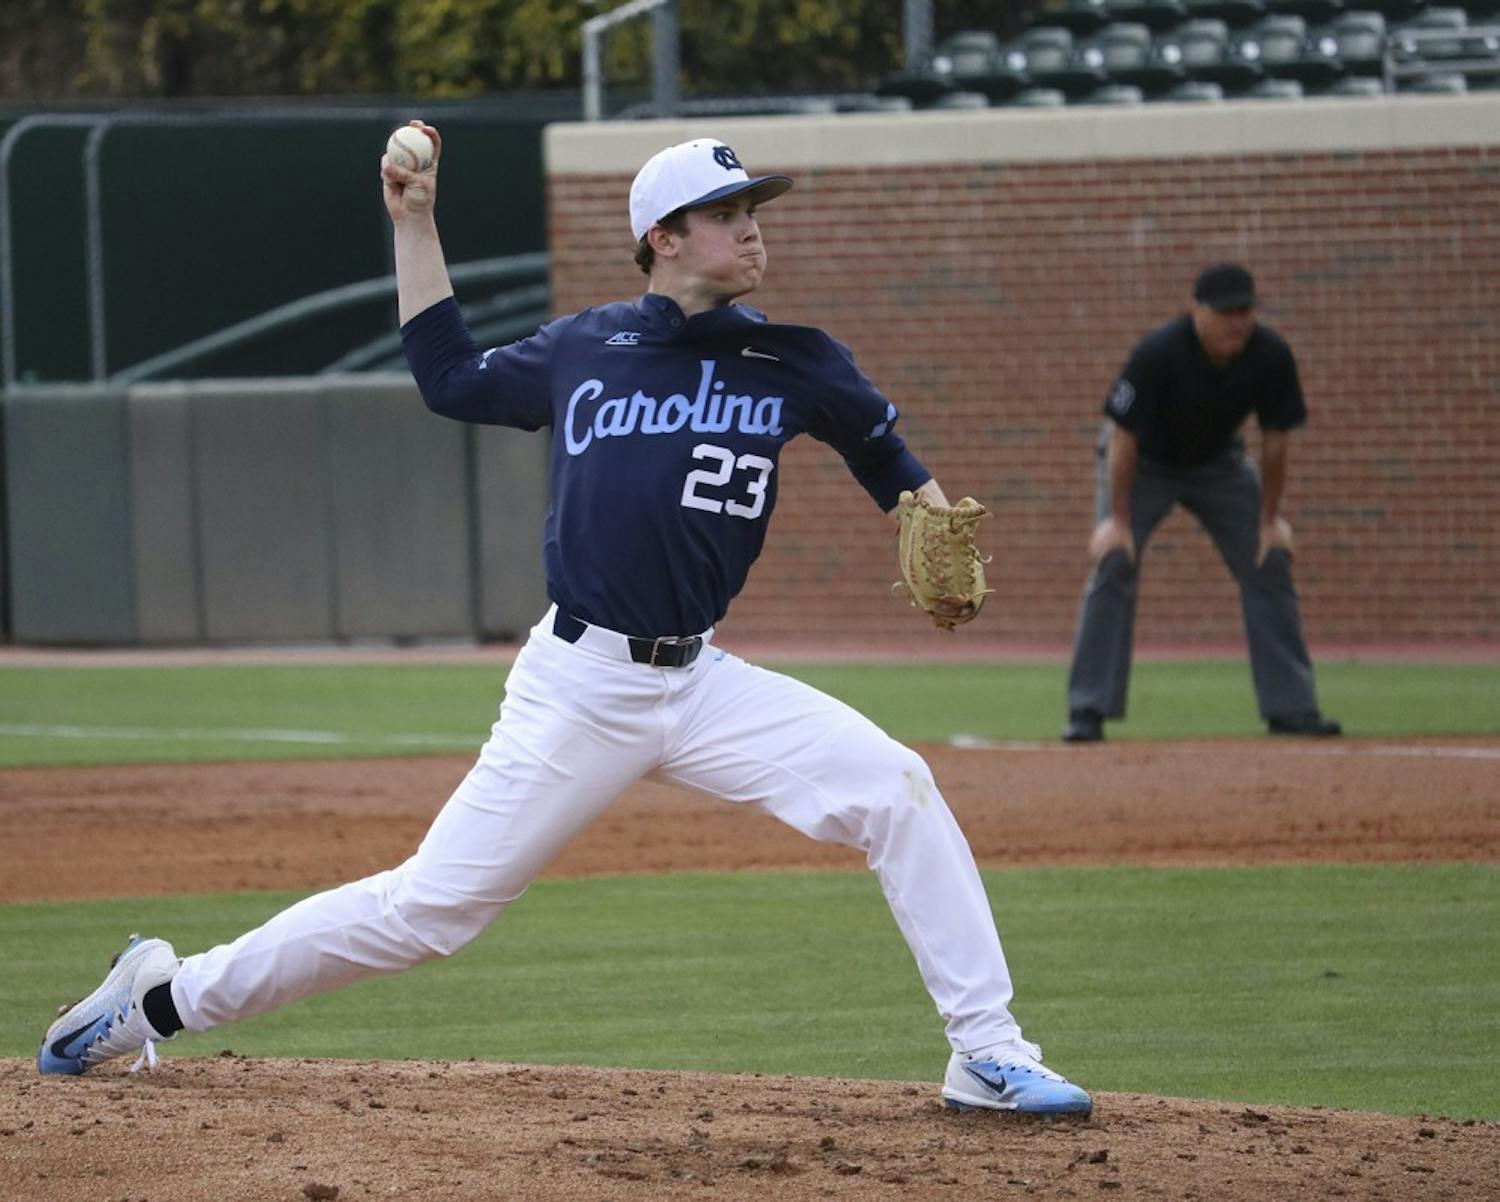 North Carolina pitcher Tyler Baum (23) allowed only two hits and no earned runs in 5 2/3 innings.